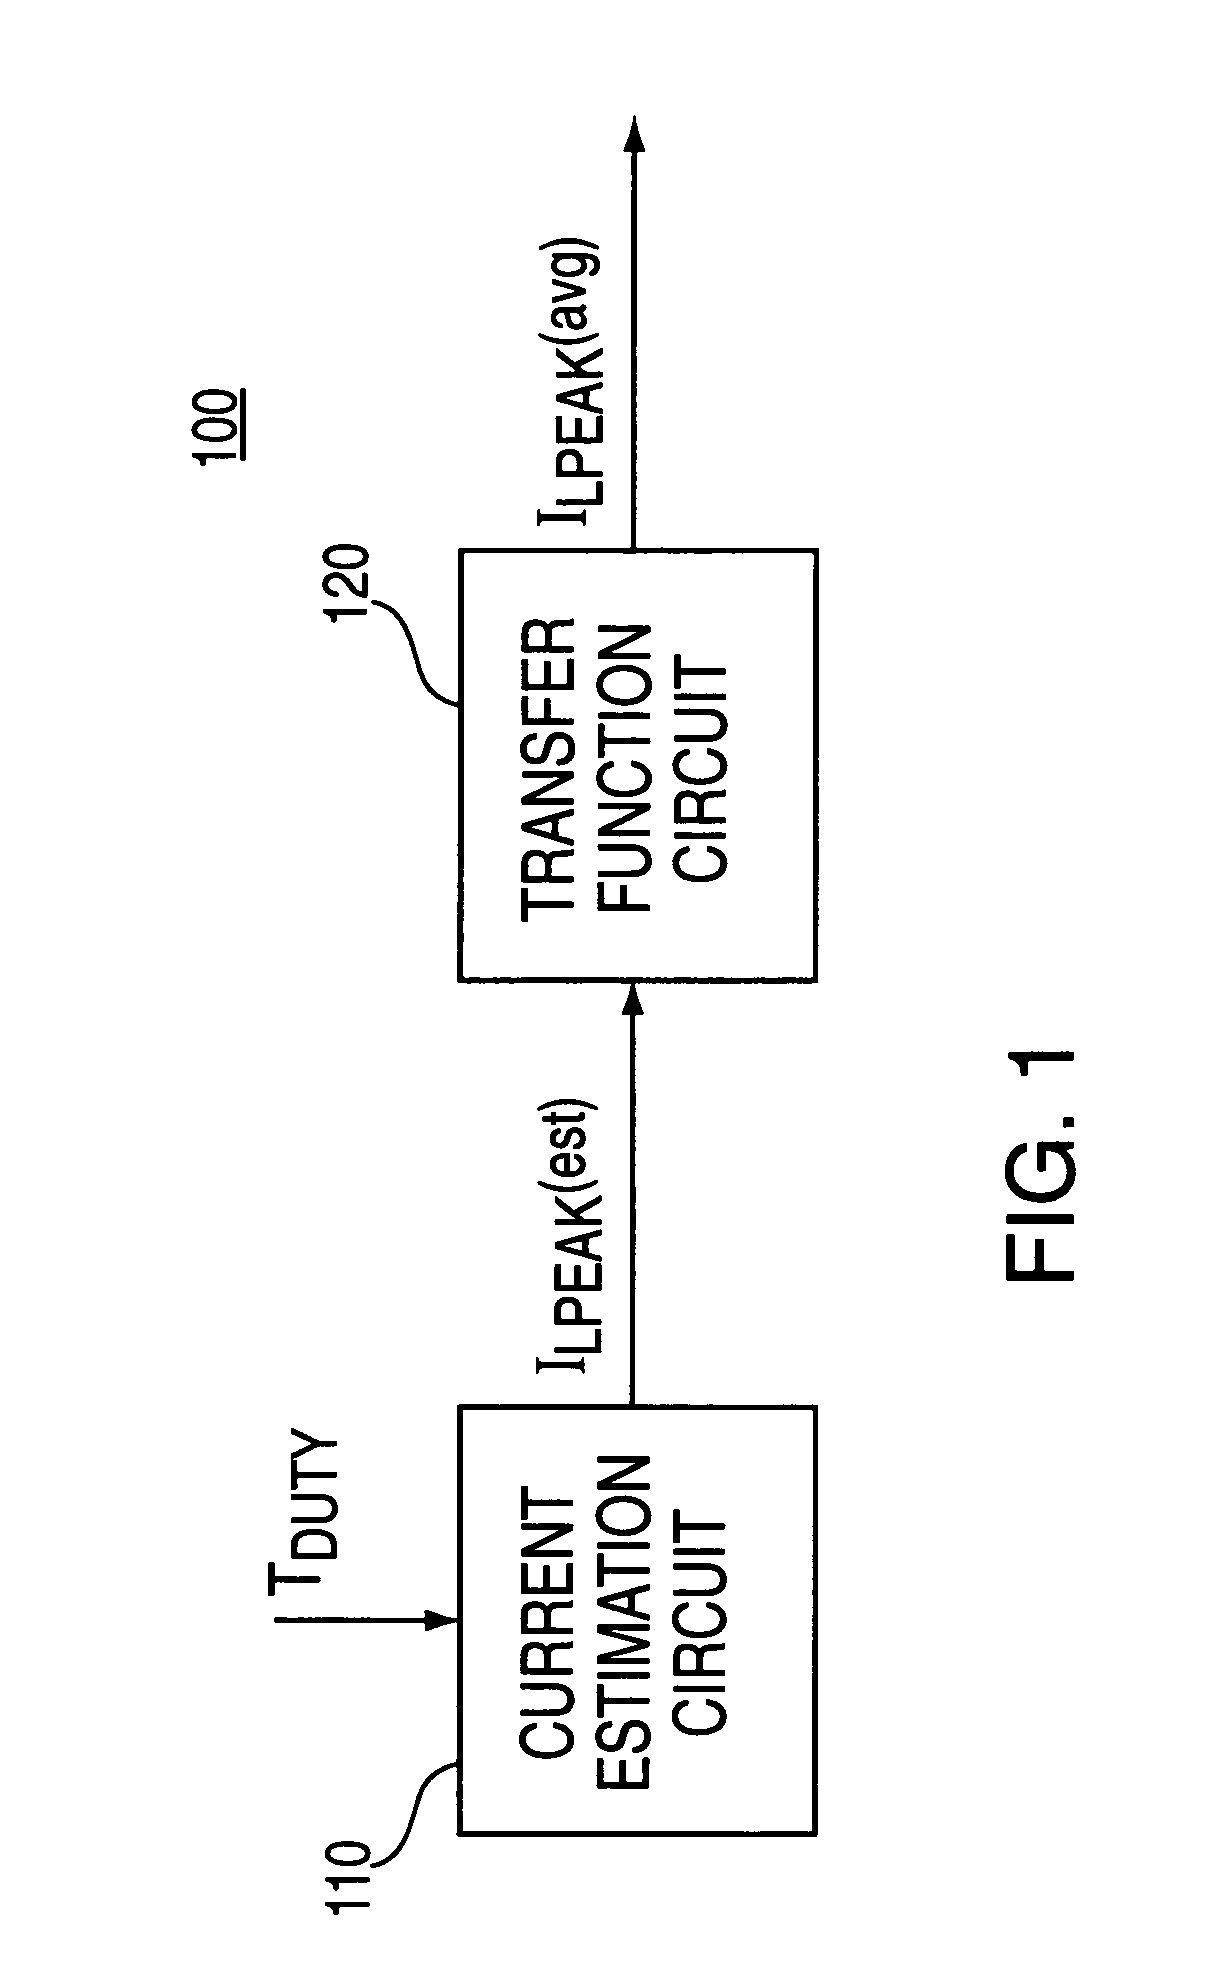 Time-based current control in switching regulators